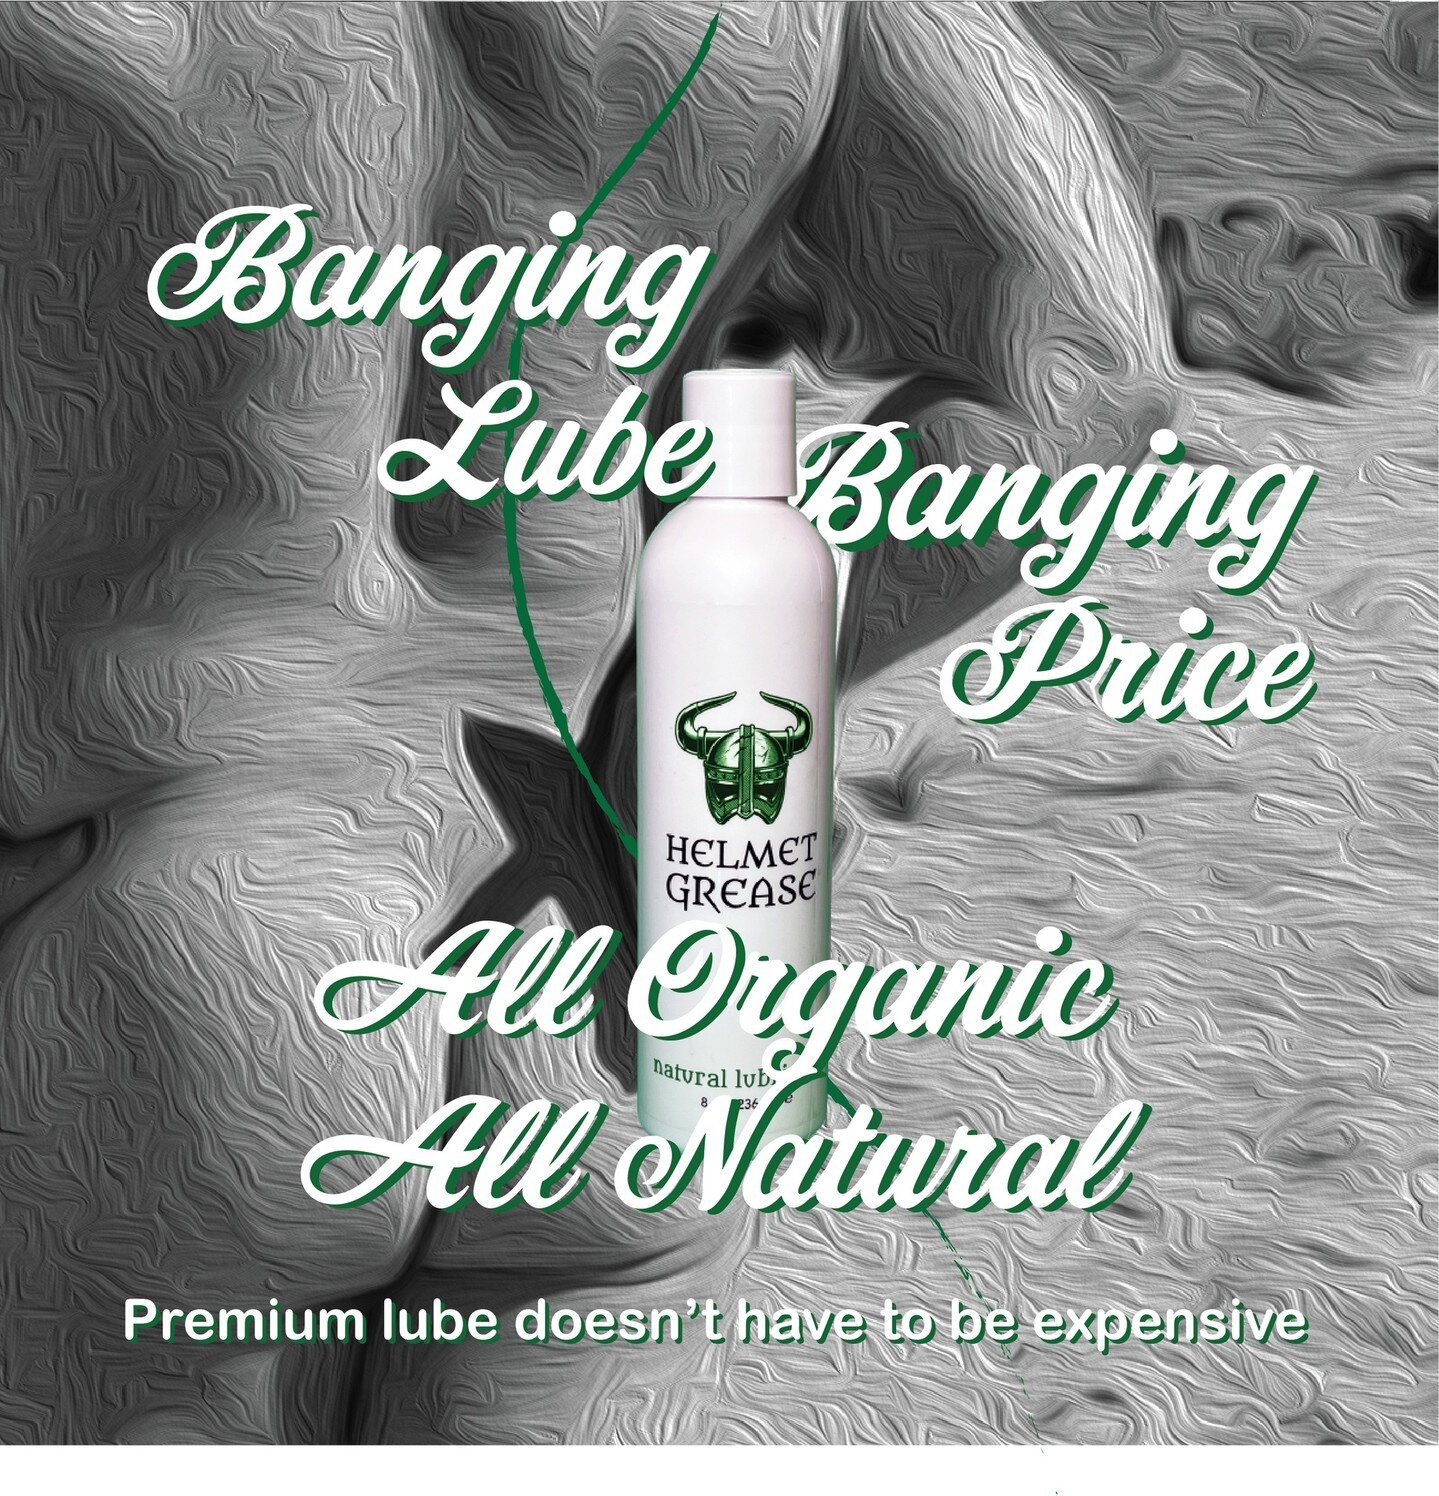 All Organic, All Natural Lube. Banging Lube, Banging Price. Looking for an all-natural option to enhance your sexual experience? Look no further than our all-natural sex lubricant! Made with only the finest, high-quality ingredients, our lubricant pr